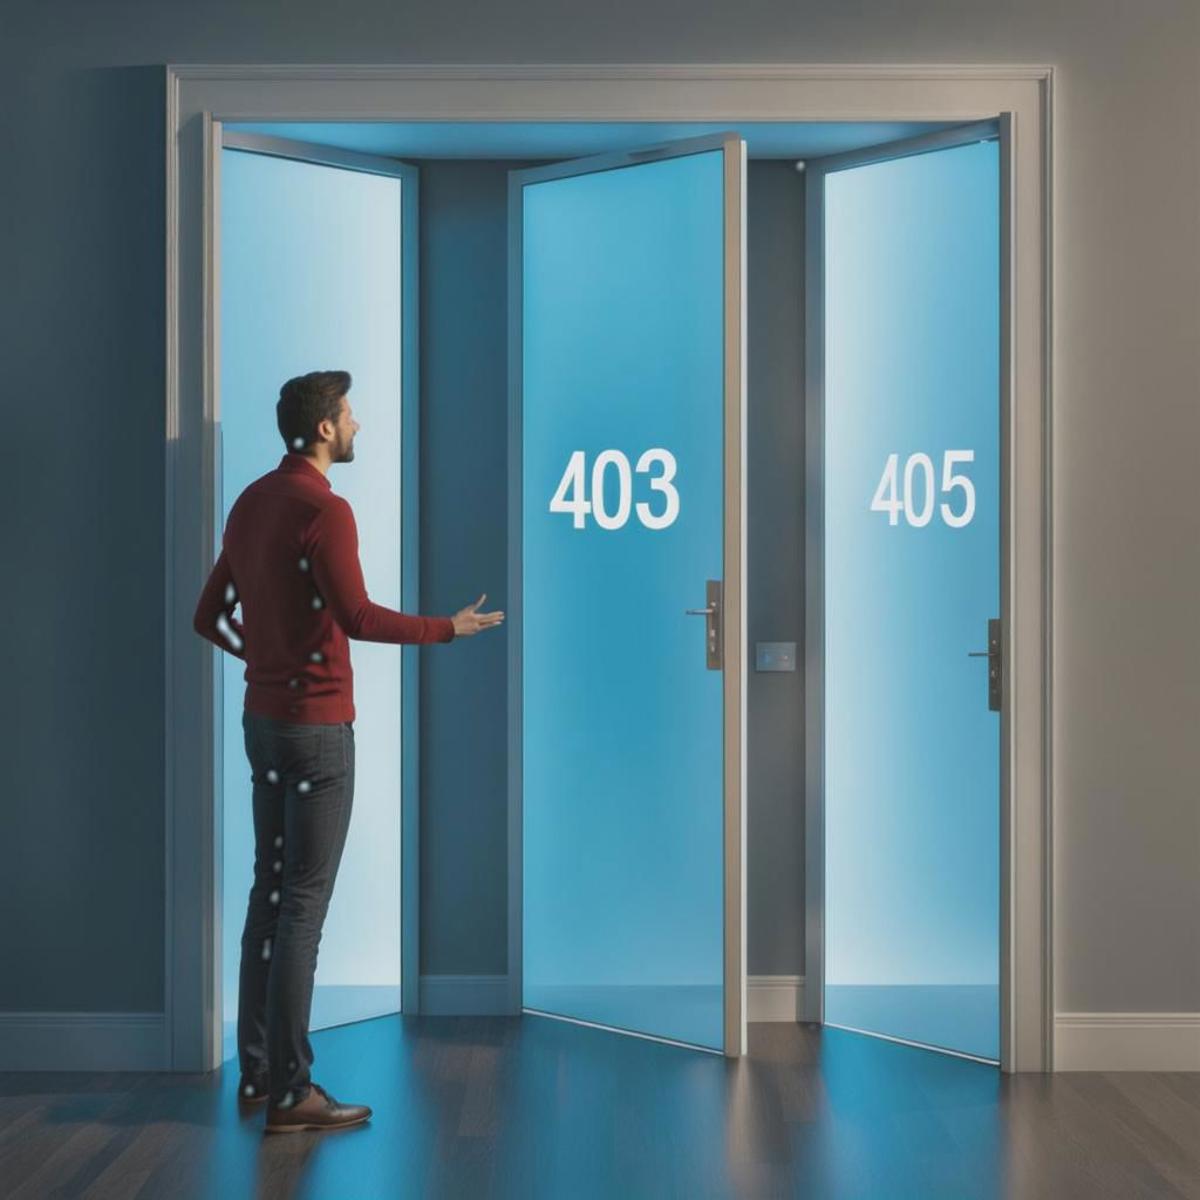 A man standing between two blue doors, with the numbers 403 and 405 on them.